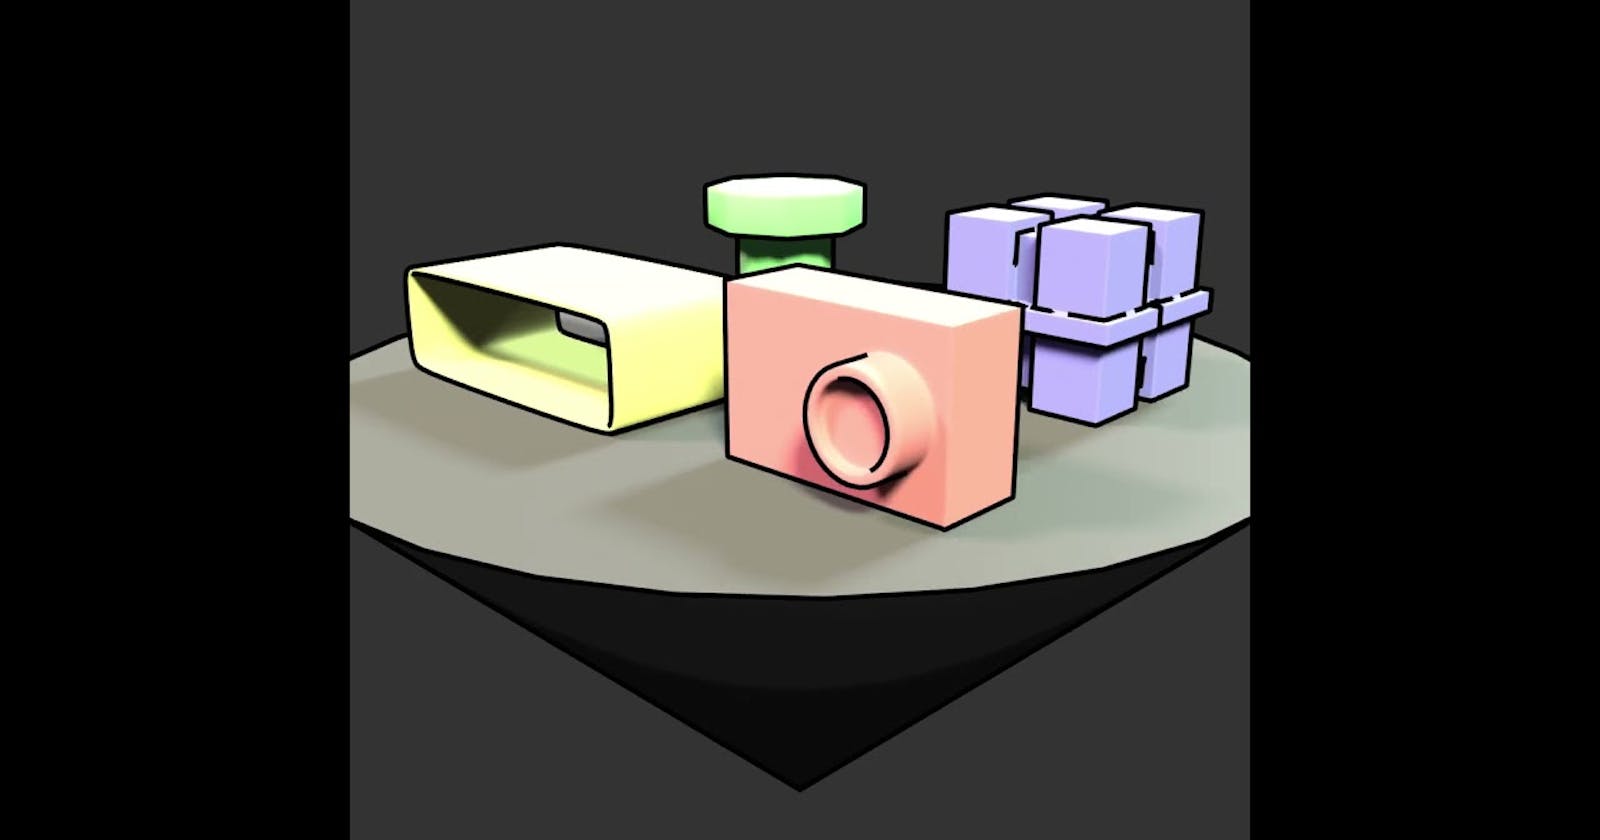 Blender 3D Progress #11 - Four Objects On An Inverted Cone